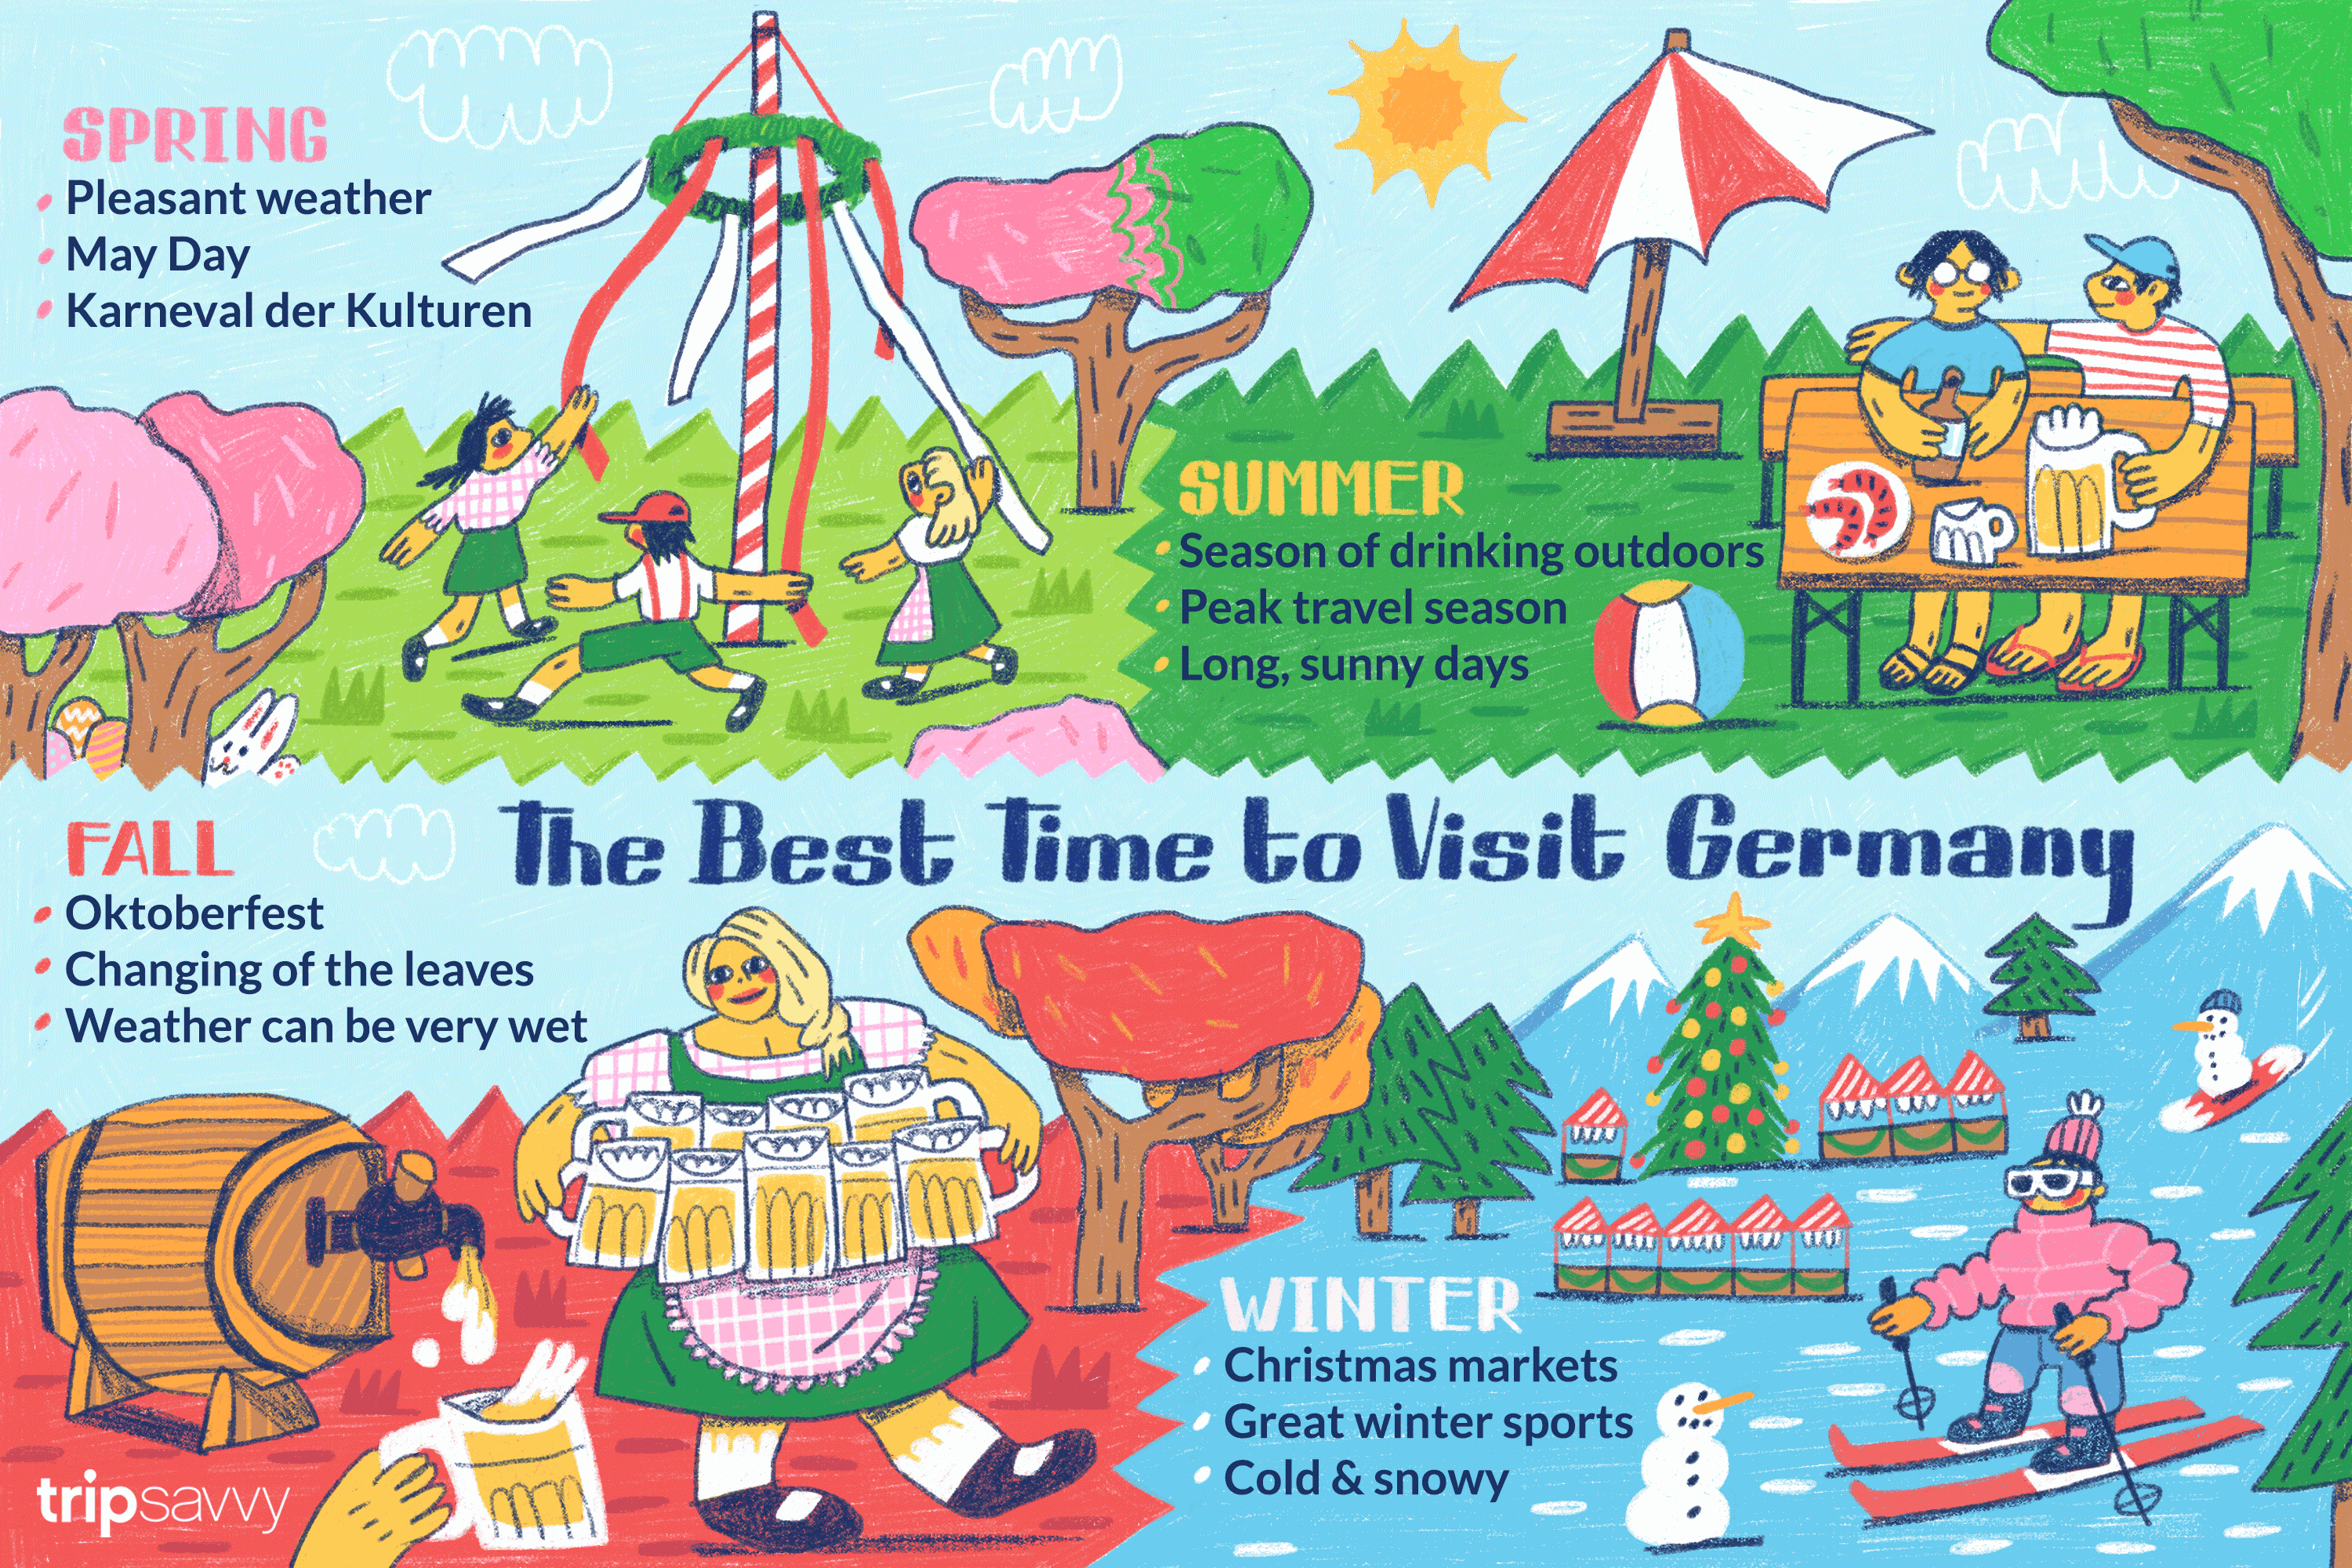 The Best Time to Visit Germany